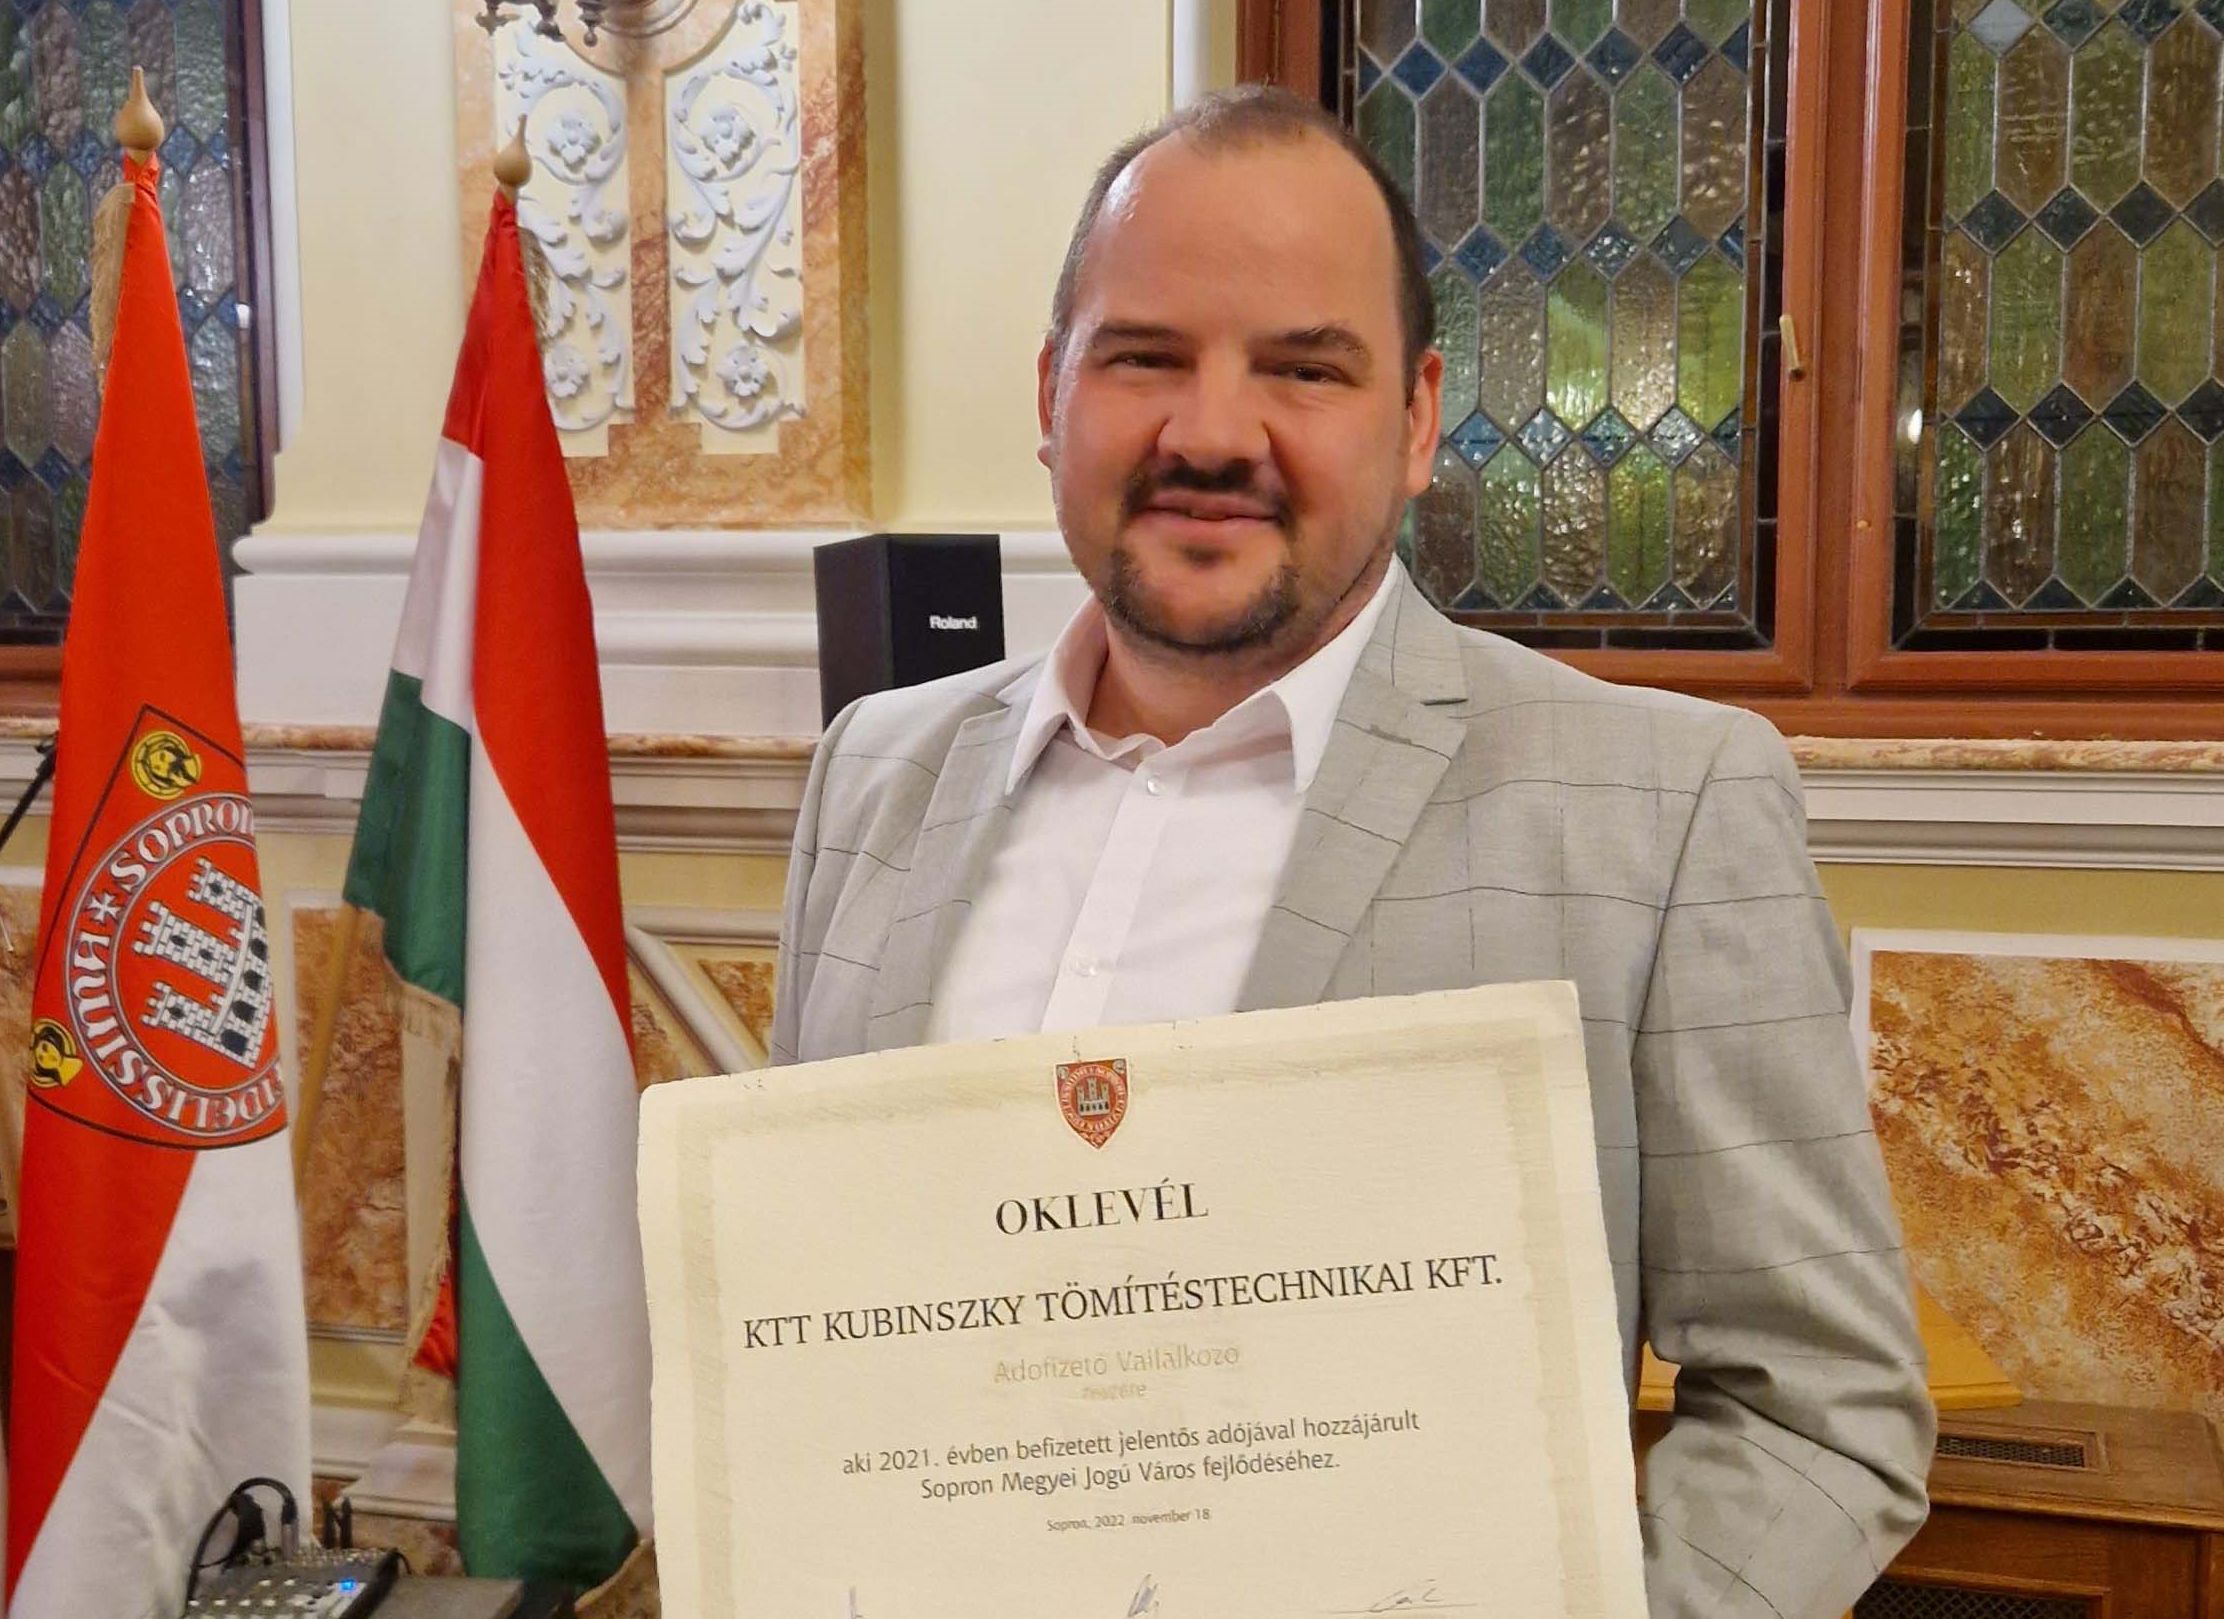 KTT | employer certificate from the city of Sopron